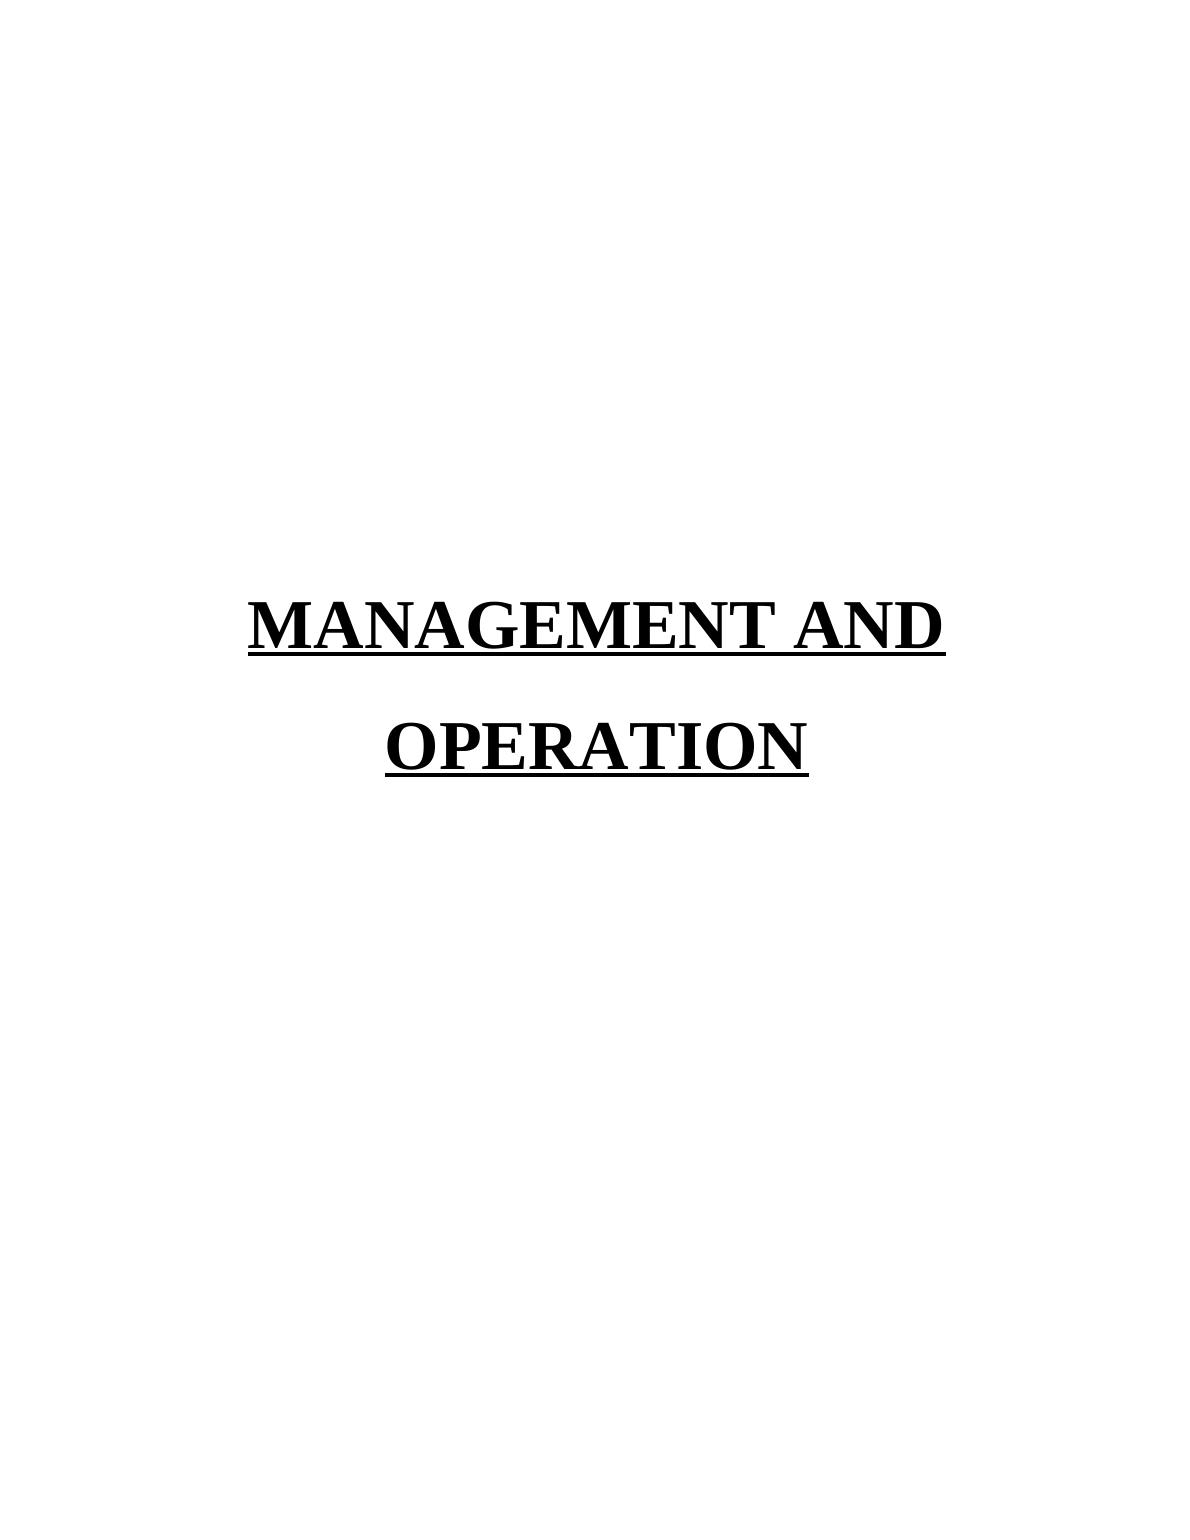 Management and Operation: Roles of Leaders and Managers in Arcadia Group_1